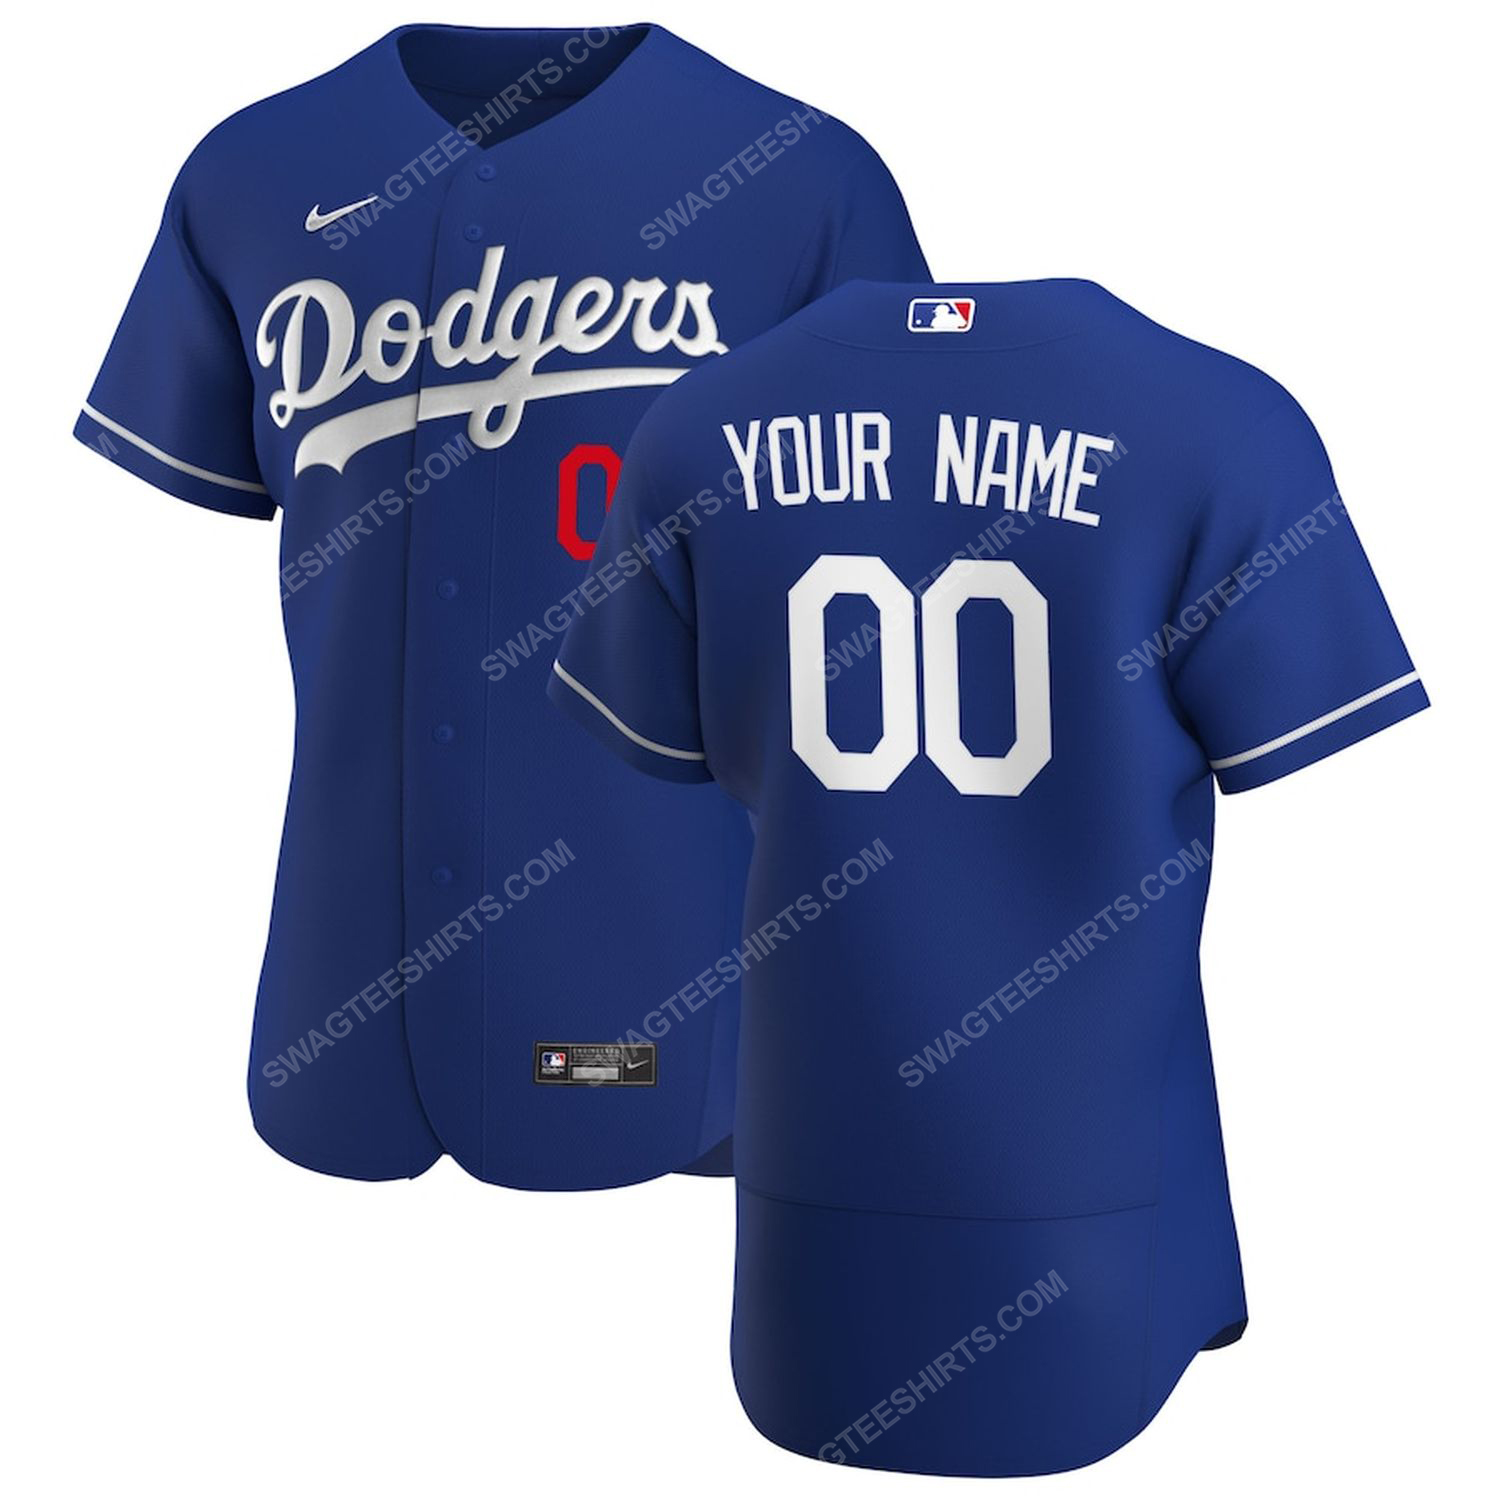 [special edition] Personalized mlb los angeles dodgers baseball jersey – maria